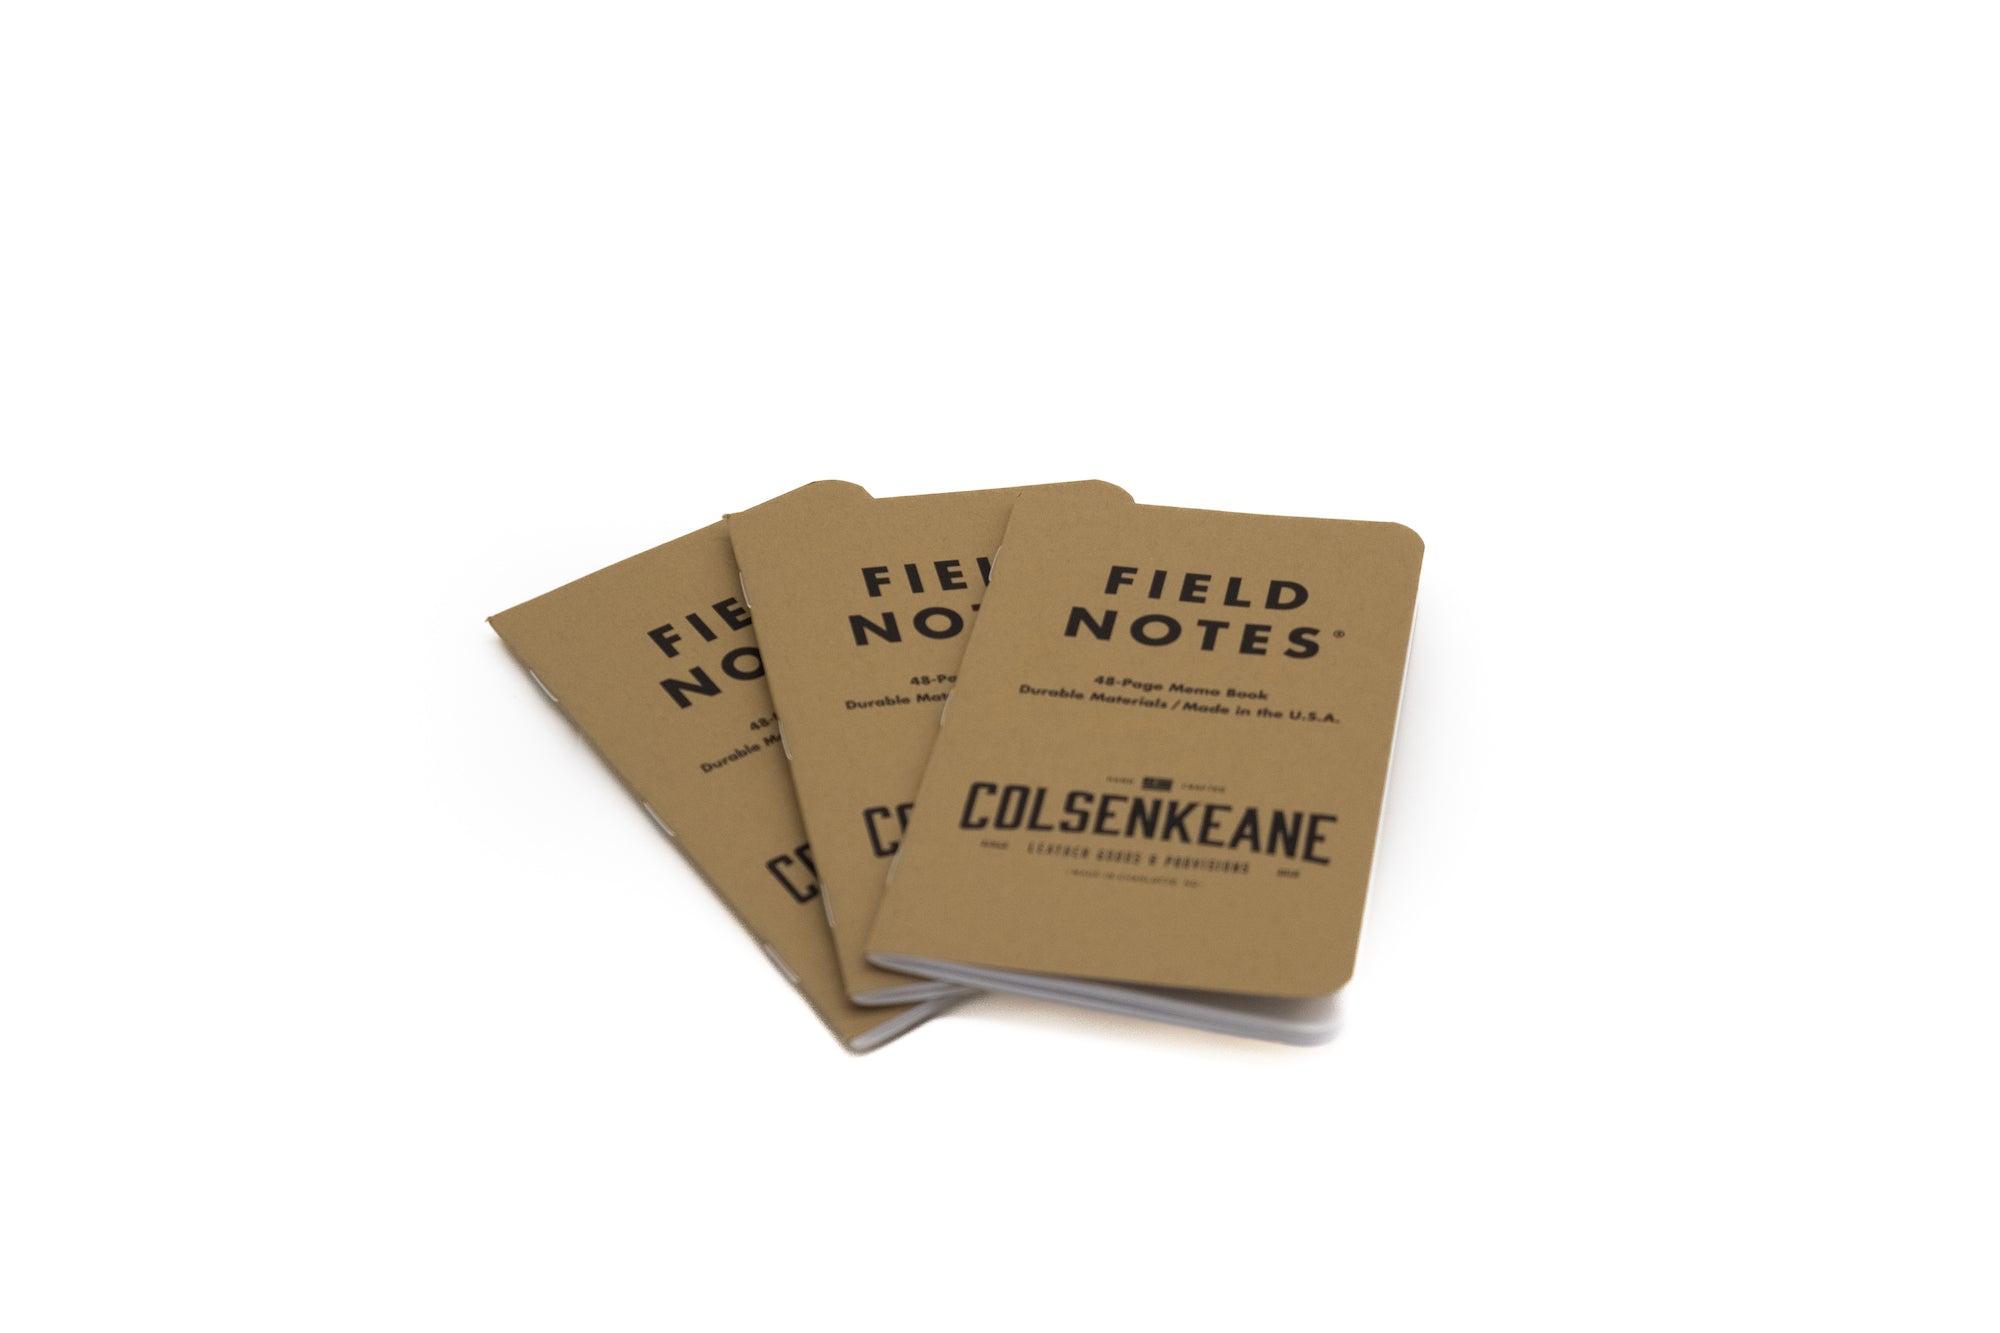 Field Notes Memo Book Journal Inserts